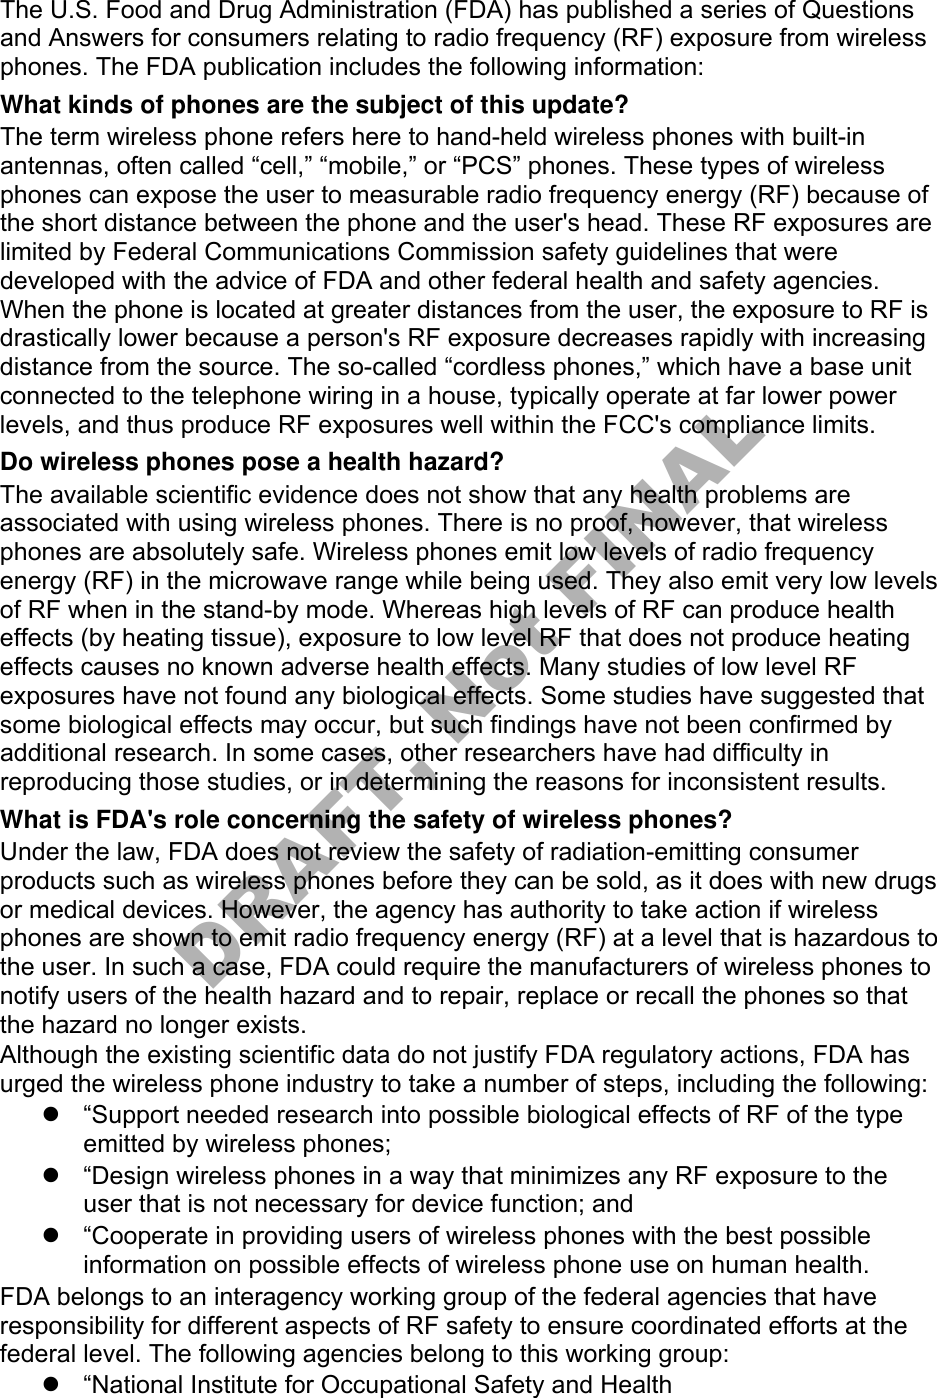 The U.S. Food and Drug Administration (FDA) has published a series of Questions and Answers for consumers relating to radio frequency (RF) exposure from wireless phones. The FDA publication includes the following information: What kinds of phones are the subject of this update? The term wireless phone refers here to hand-held wireless phones with built-in antennas, often called “cell,” “mobile,” or “PCS” phones. These types of wireless phones can expose the user to measurable radio frequency energy (RF) because of the short distance between the phone and the user&apos;s head. These RF exposures are limited by Federal Communications Commission safety guidelines that were developed with the advice of FDA and other federal health and safety agencies. When the phone is located at greater distances from the user, the exposure to RF is drastically lower because a person&apos;s RF exposure decreases rapidly with increasing distance from the source. The so-called “cordless phones,” which have a base unit connected to the telephone wiring in a house, typically operate at far lower power levels, and thus produce RF exposures well within the FCC&apos;s compliance limits. Do wireless phones pose a health hazard? The available scientific evidence does not show that any health problems are associated with using wireless phones. There is no proof, however, that wireless phones are absolutely safe. Wireless phones emit low levels of radio frequency energy (RF) in the microwave range while being used. They also emit very low levels of RF when in the stand-by mode. Whereas high levels of RF can produce health effects (by heating tissue), exposure to low level RF that does not produce heating effects causes no known adverse health effects. Many studies of low level RF exposures have not found any biological effects. Some studies have suggested that some biological effects may occur, but such findings have not been confirmed by additional research. In some cases, other researchers have had difficulty in reproducing those studies, or in determining the reasons for inconsistent results. What is FDA&apos;s role concerning the safety of wireless phones? Under the law, FDA does not review the safety of radiation-emitting consumer products such as wireless phones before they can be sold, as it does with new drugs or medical devices. However, the agency has authority to take action if wireless phones are shown to emit radio frequency energy (RF) at a level that is hazardous to the user. In such a case, FDA could require the manufacturers of wireless phones to notify users of the health hazard and to repair, replace or recall the phones so that the hazard no longer exists. Although the existing scientific data do not justify FDA regulatory actions, FDA has urged the wireless phone industry to take a number of steps, including the following: “Support needed research into possible biological effects of RF of the typeemitted by wireless phones;“Design wireless phones in a way that minimizes any RF exposure to theuser that is not necessary for device function; and“Cooperate in providing users of wireless phones with the best possibleinformation on possible effects of wireless phone use on human health.FDA belongs to an interagency working group of the federal agencies that have responsibility for different aspects of RF safety to ensure coordinated efforts at the federal level. The following agencies belong to this working group: “National Institute for Occupational Safety and HealthDRAFT, Not FINAL